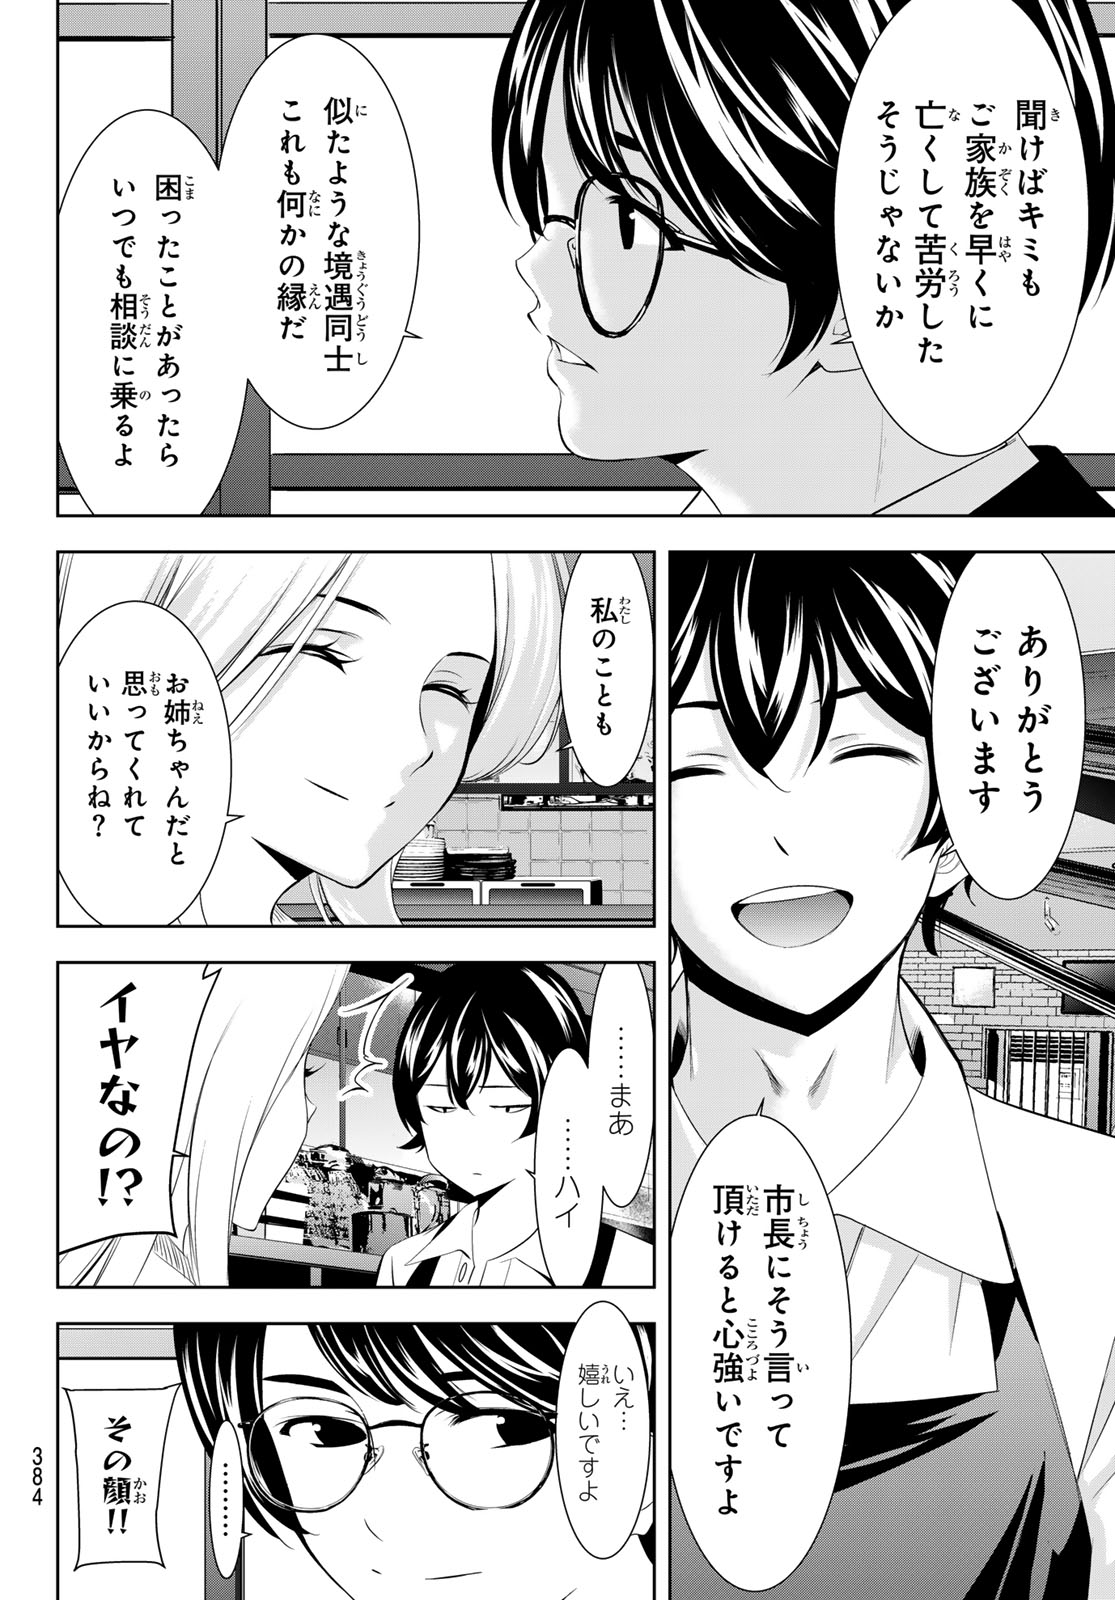 Megami no Cafe Terace - Chapter 158 - Page 8